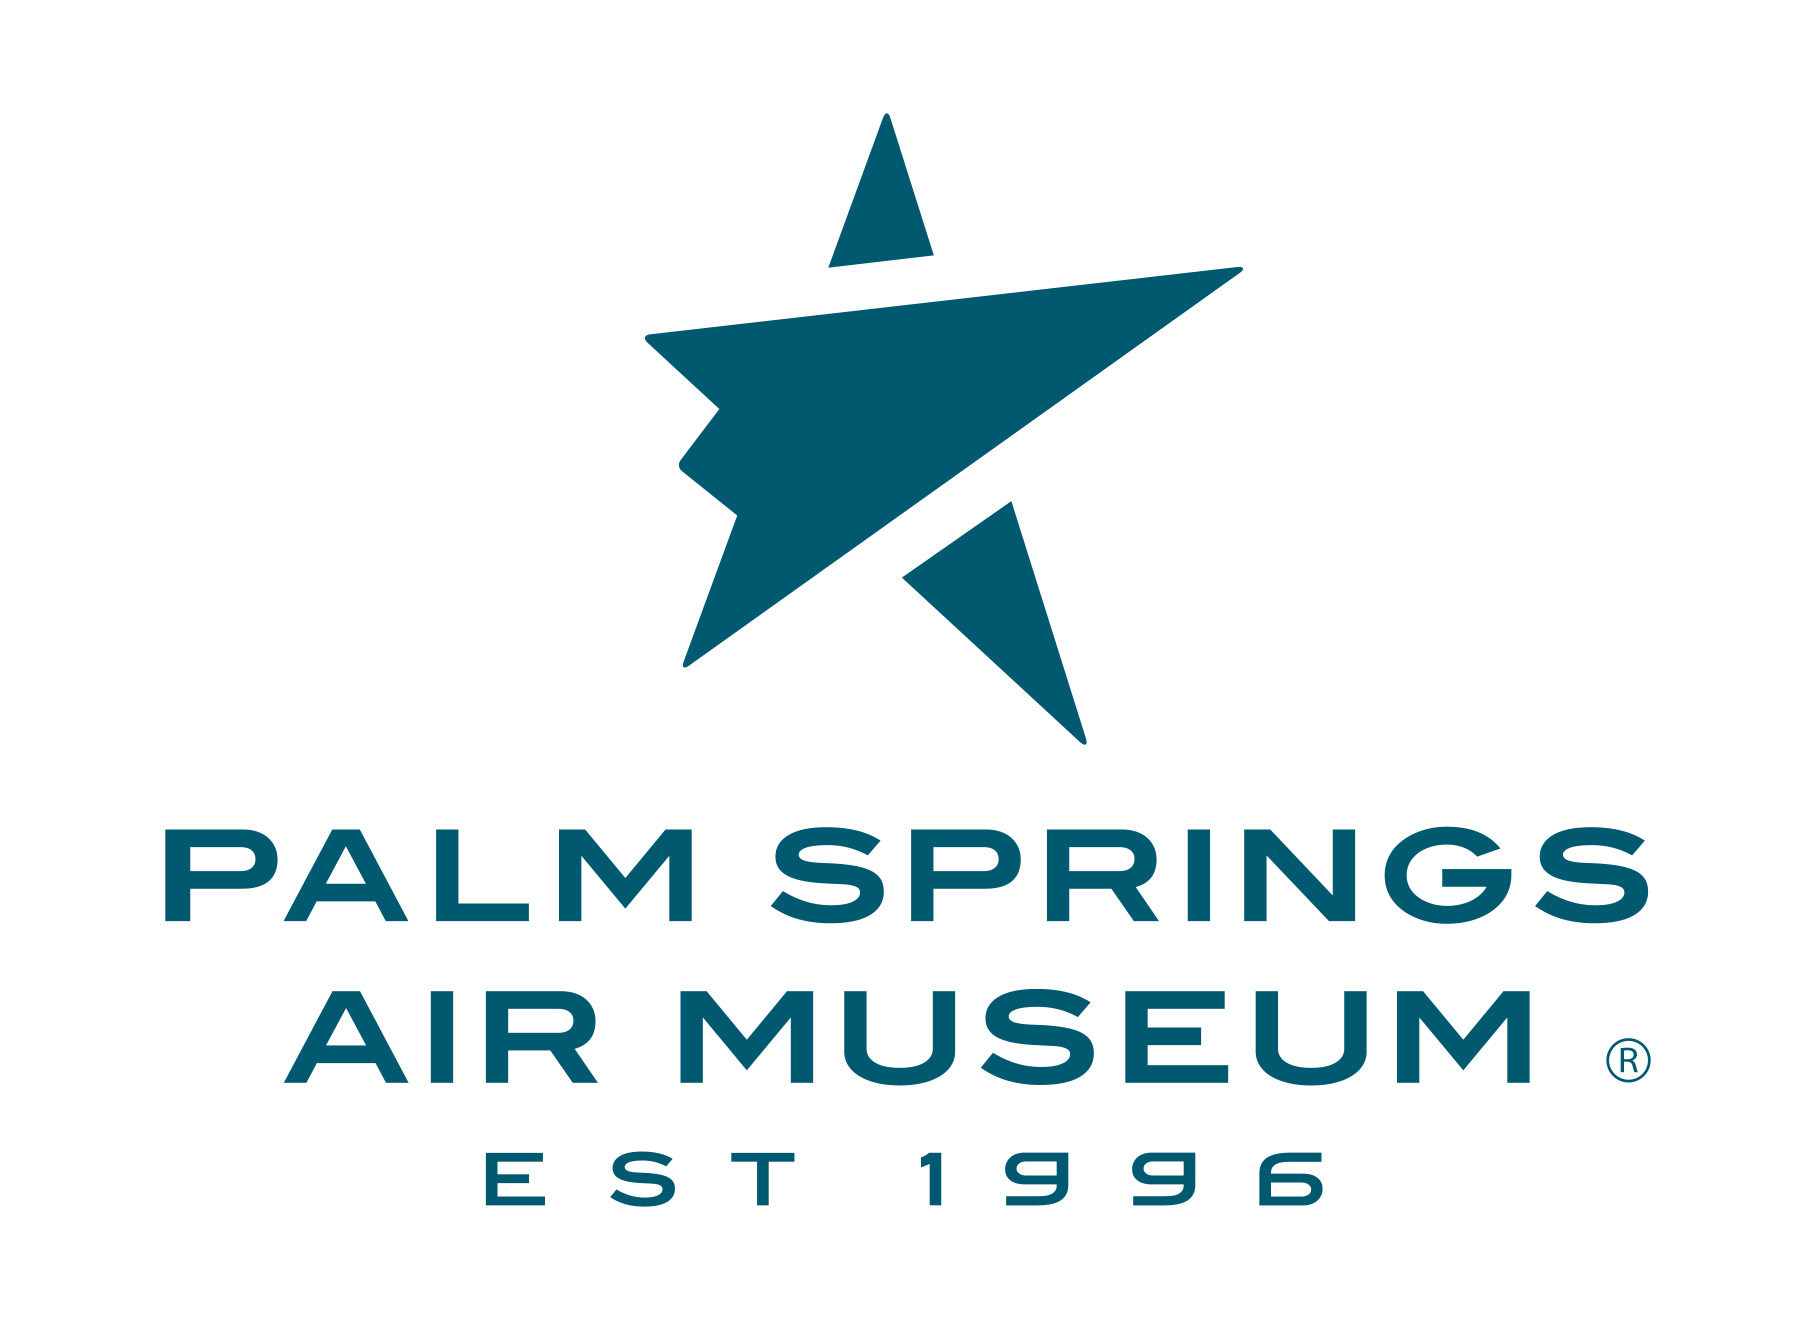 Opening of Archival Displays to Accompany Walt Disney's Grumman Gulfstream I Airplane at The Palm Springs Air Museum